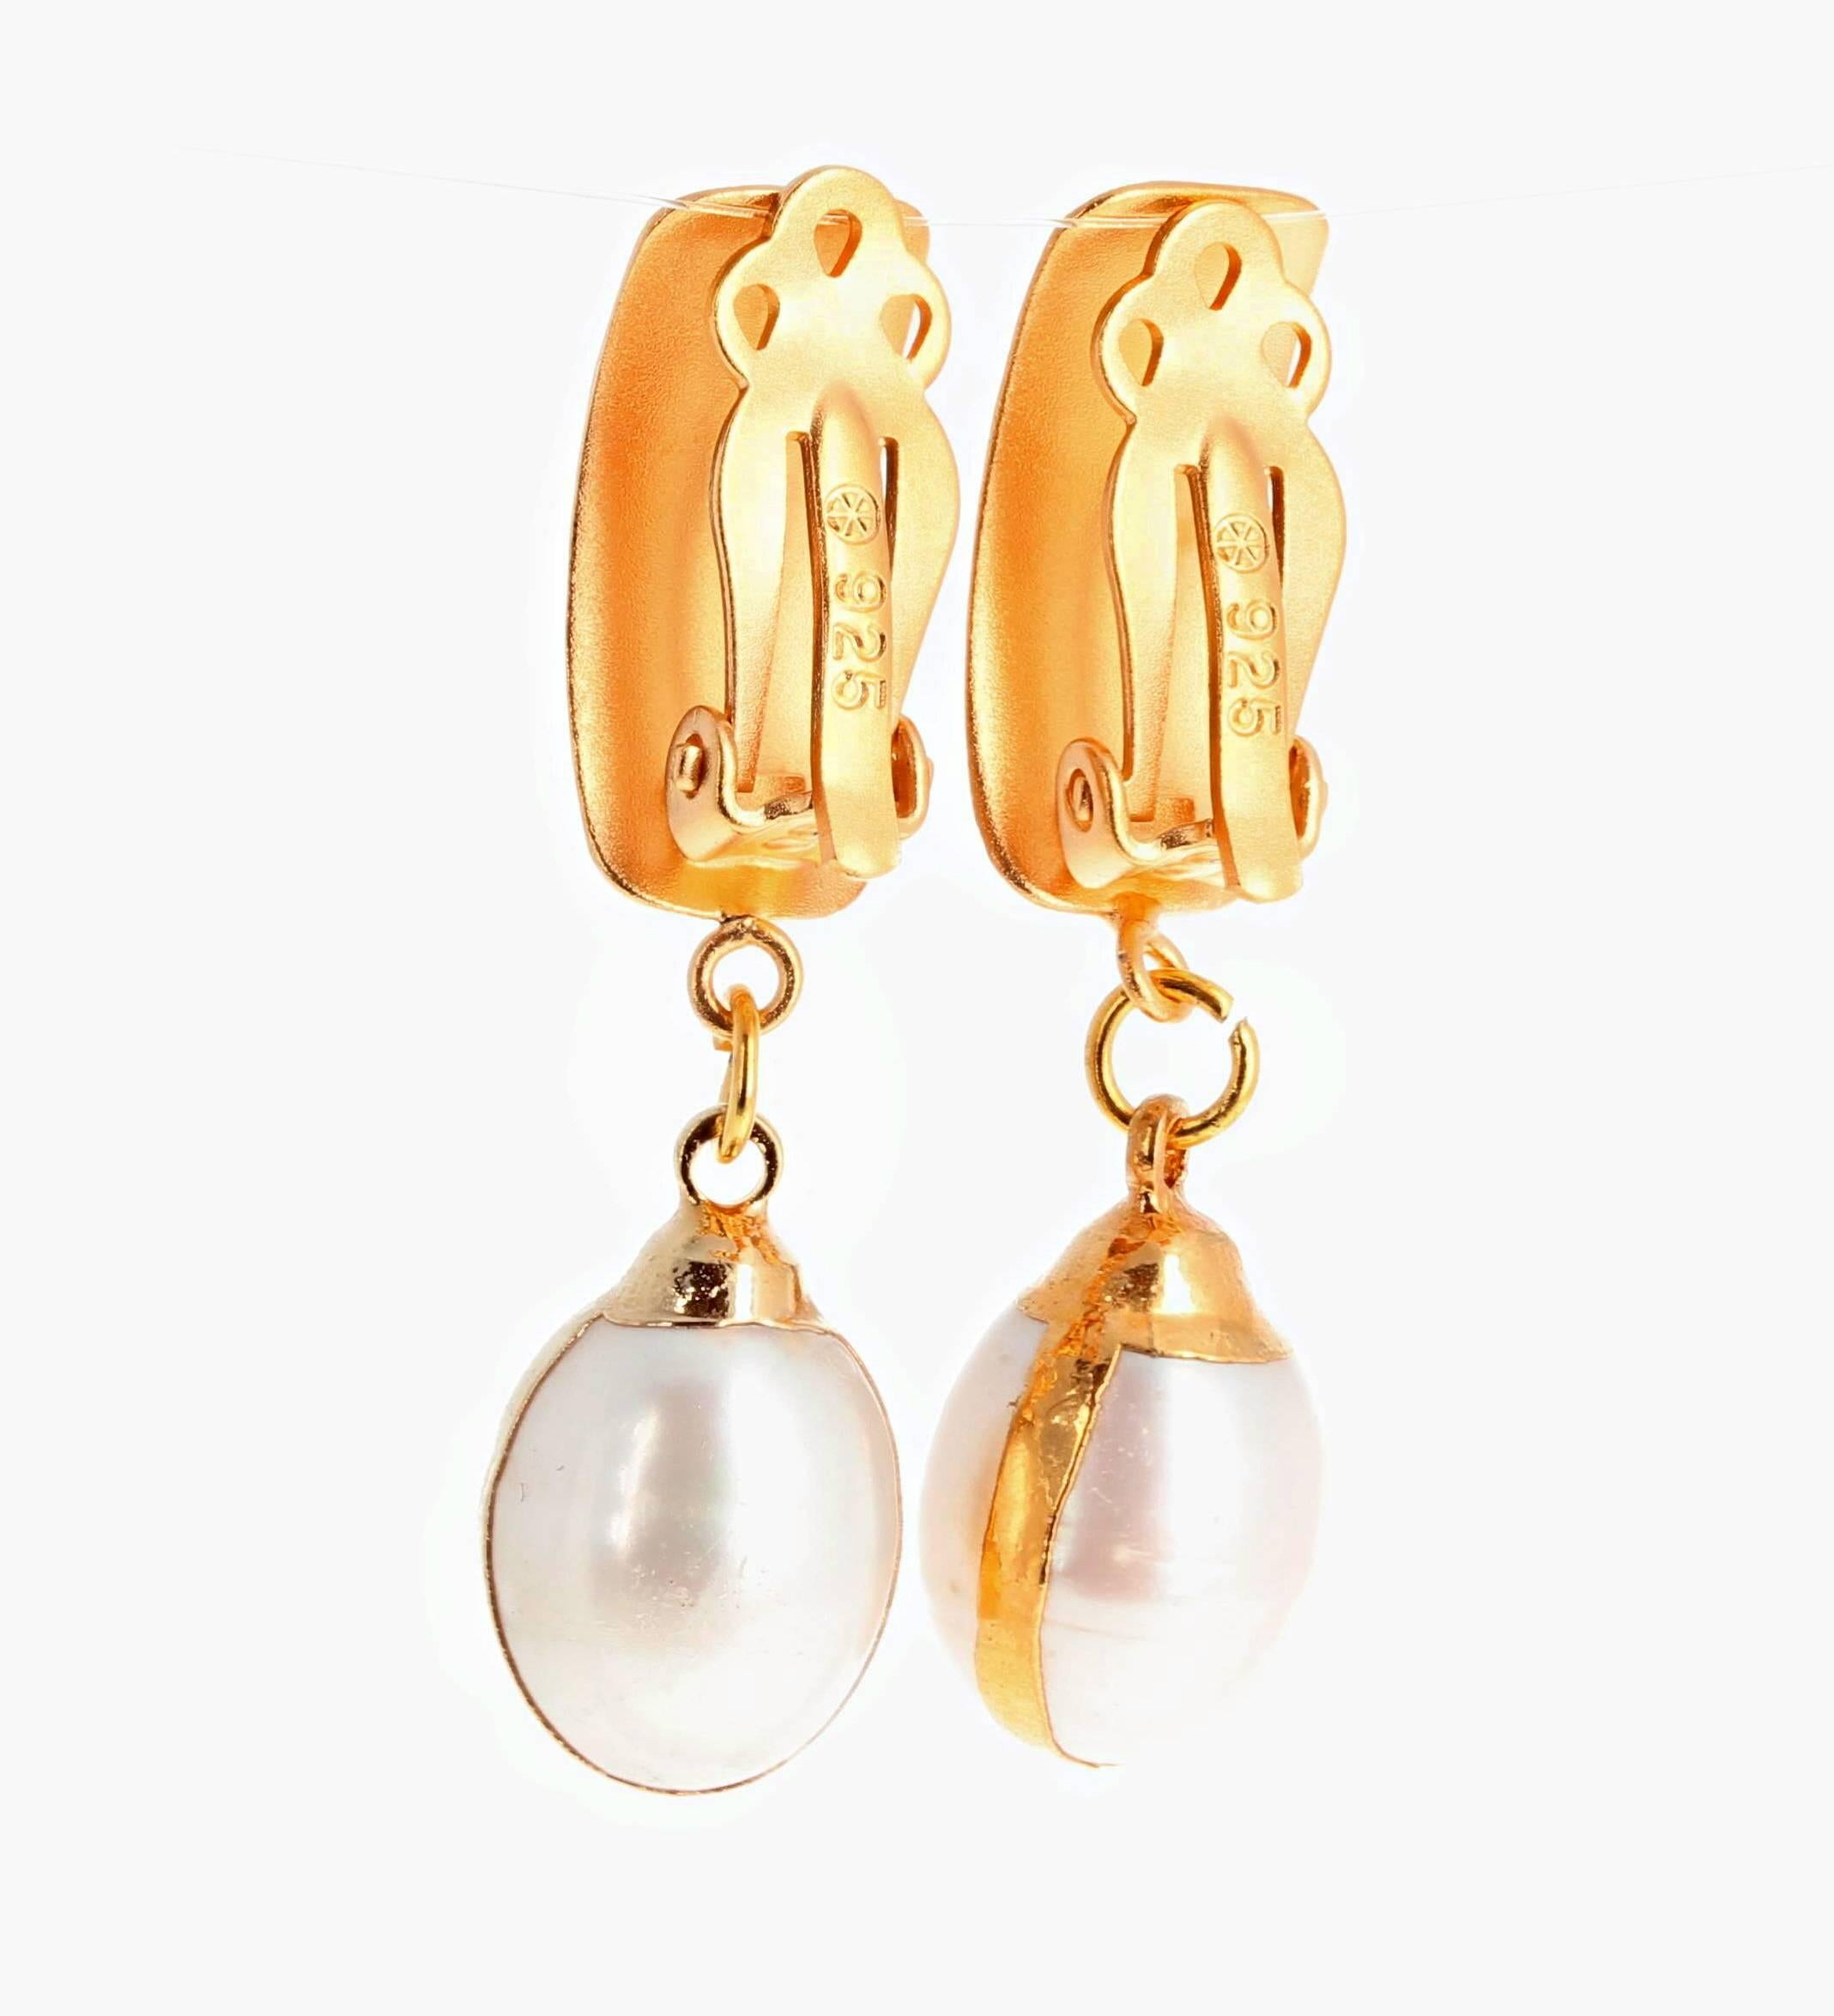 Women's Unique Handmade Clip-on Gold Plated (Vermeil) Pearl Earrings